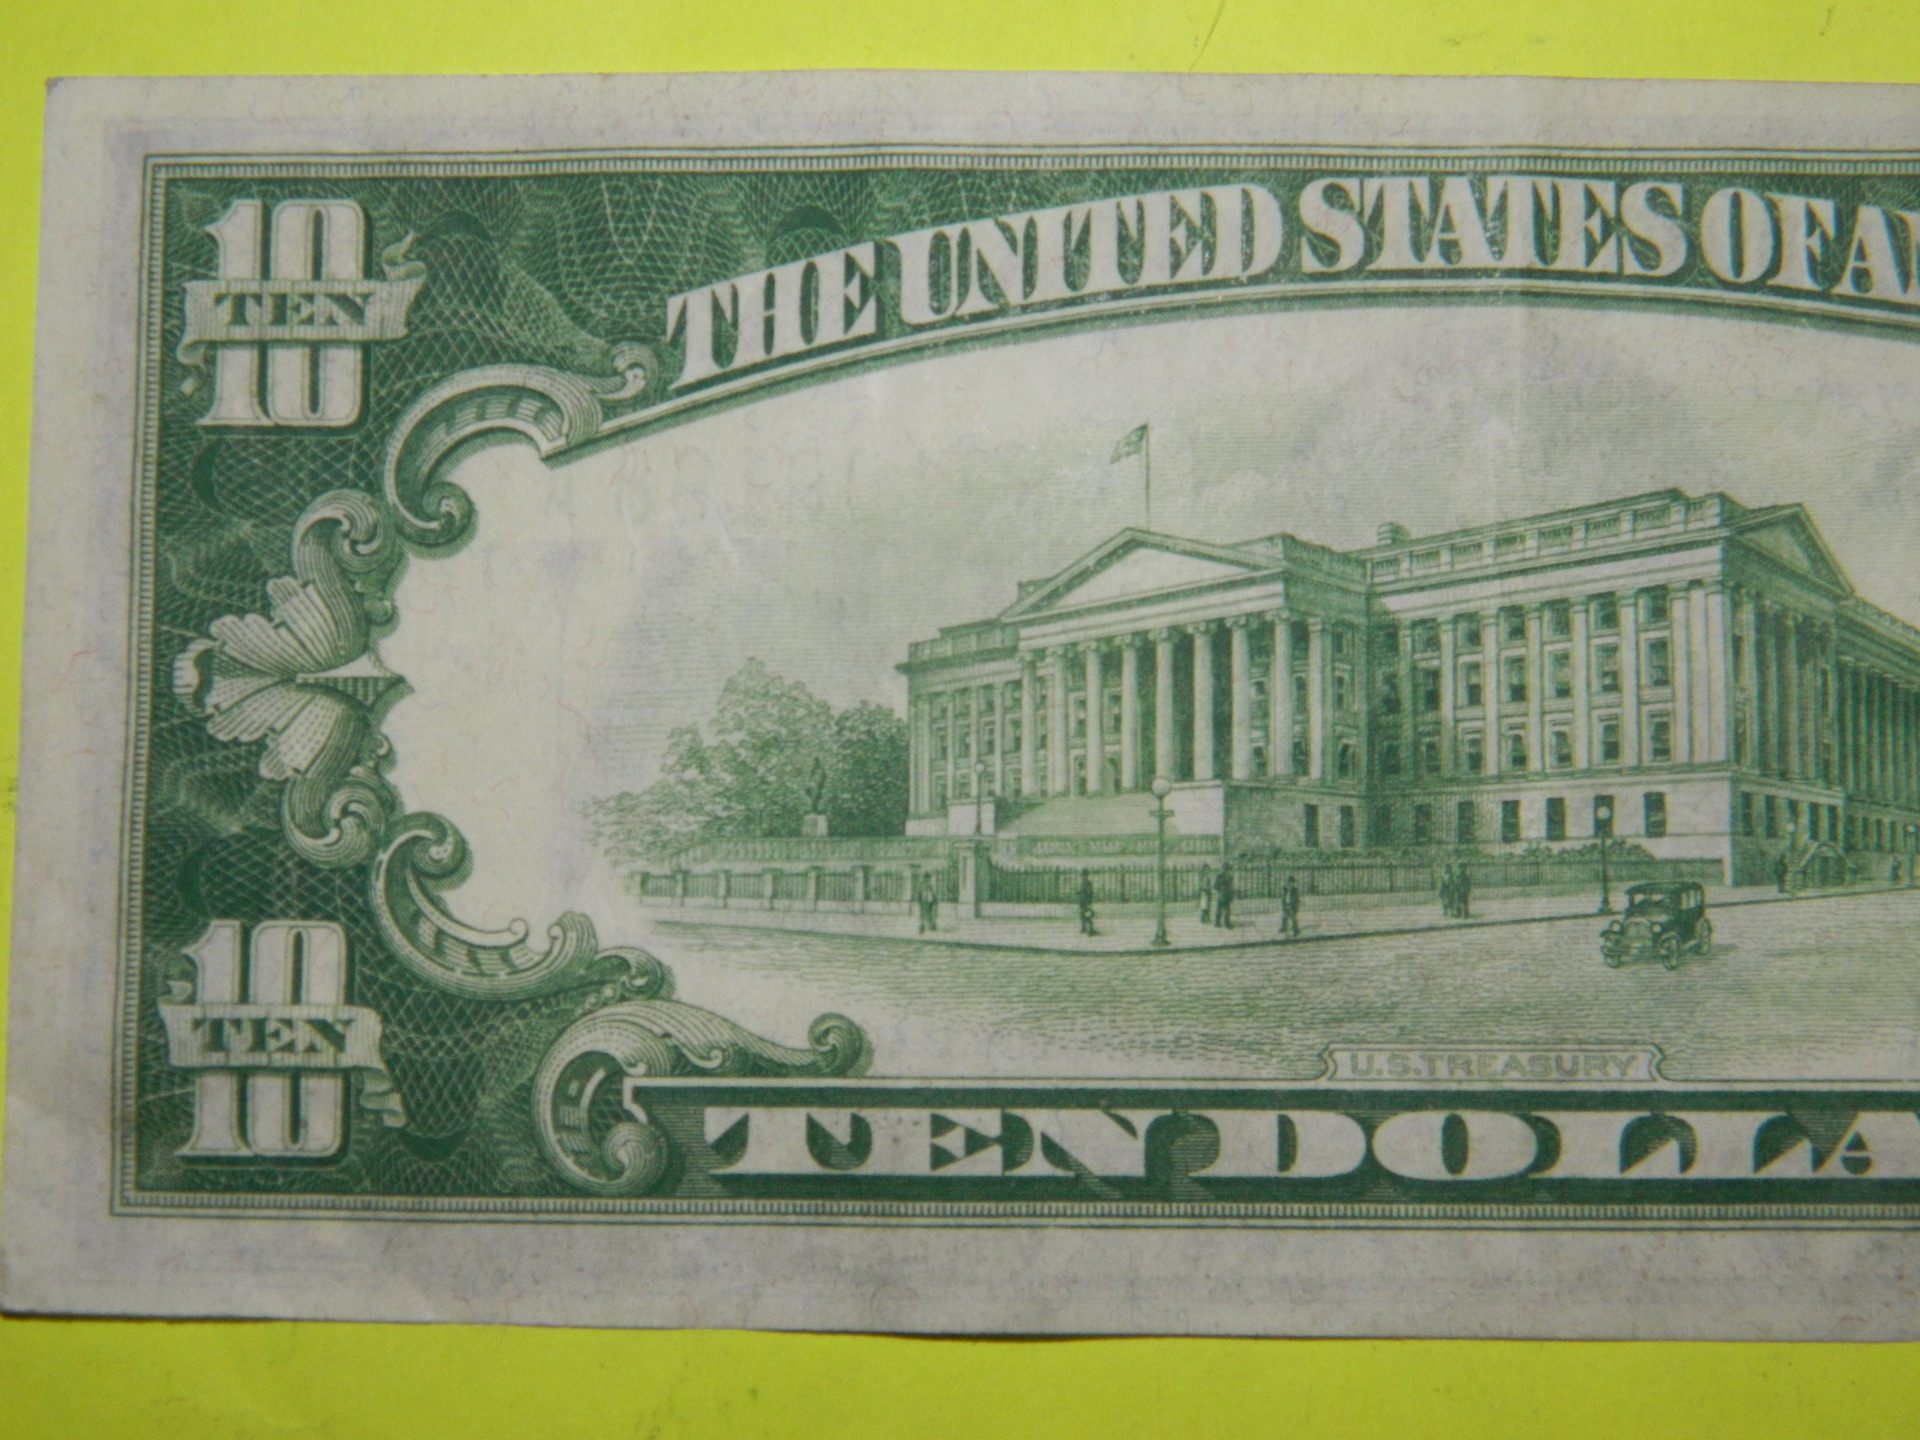 What is a $10 bill from 1934 worth? - Quora